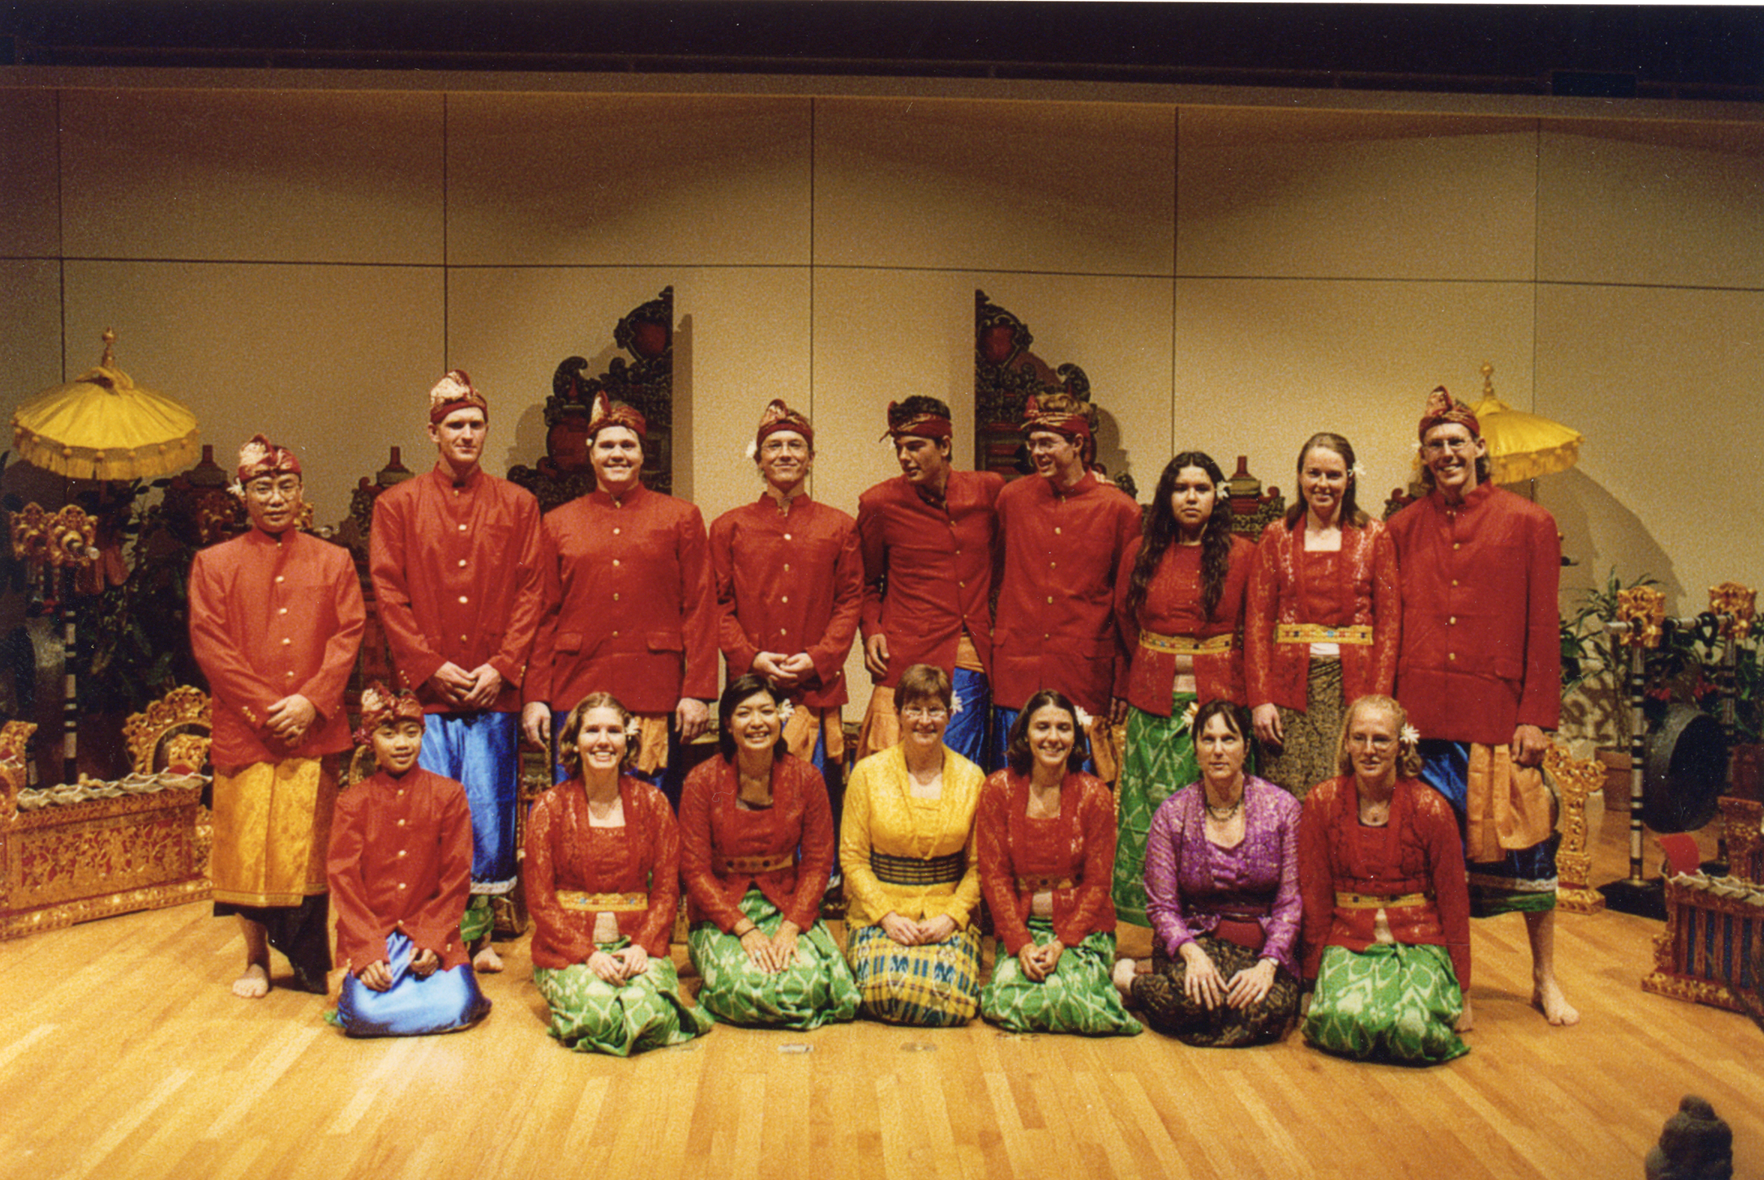 A CC Gamelan ensemble group photo from the 1990s. (Courtesy of Victoria Lindsay Levine)